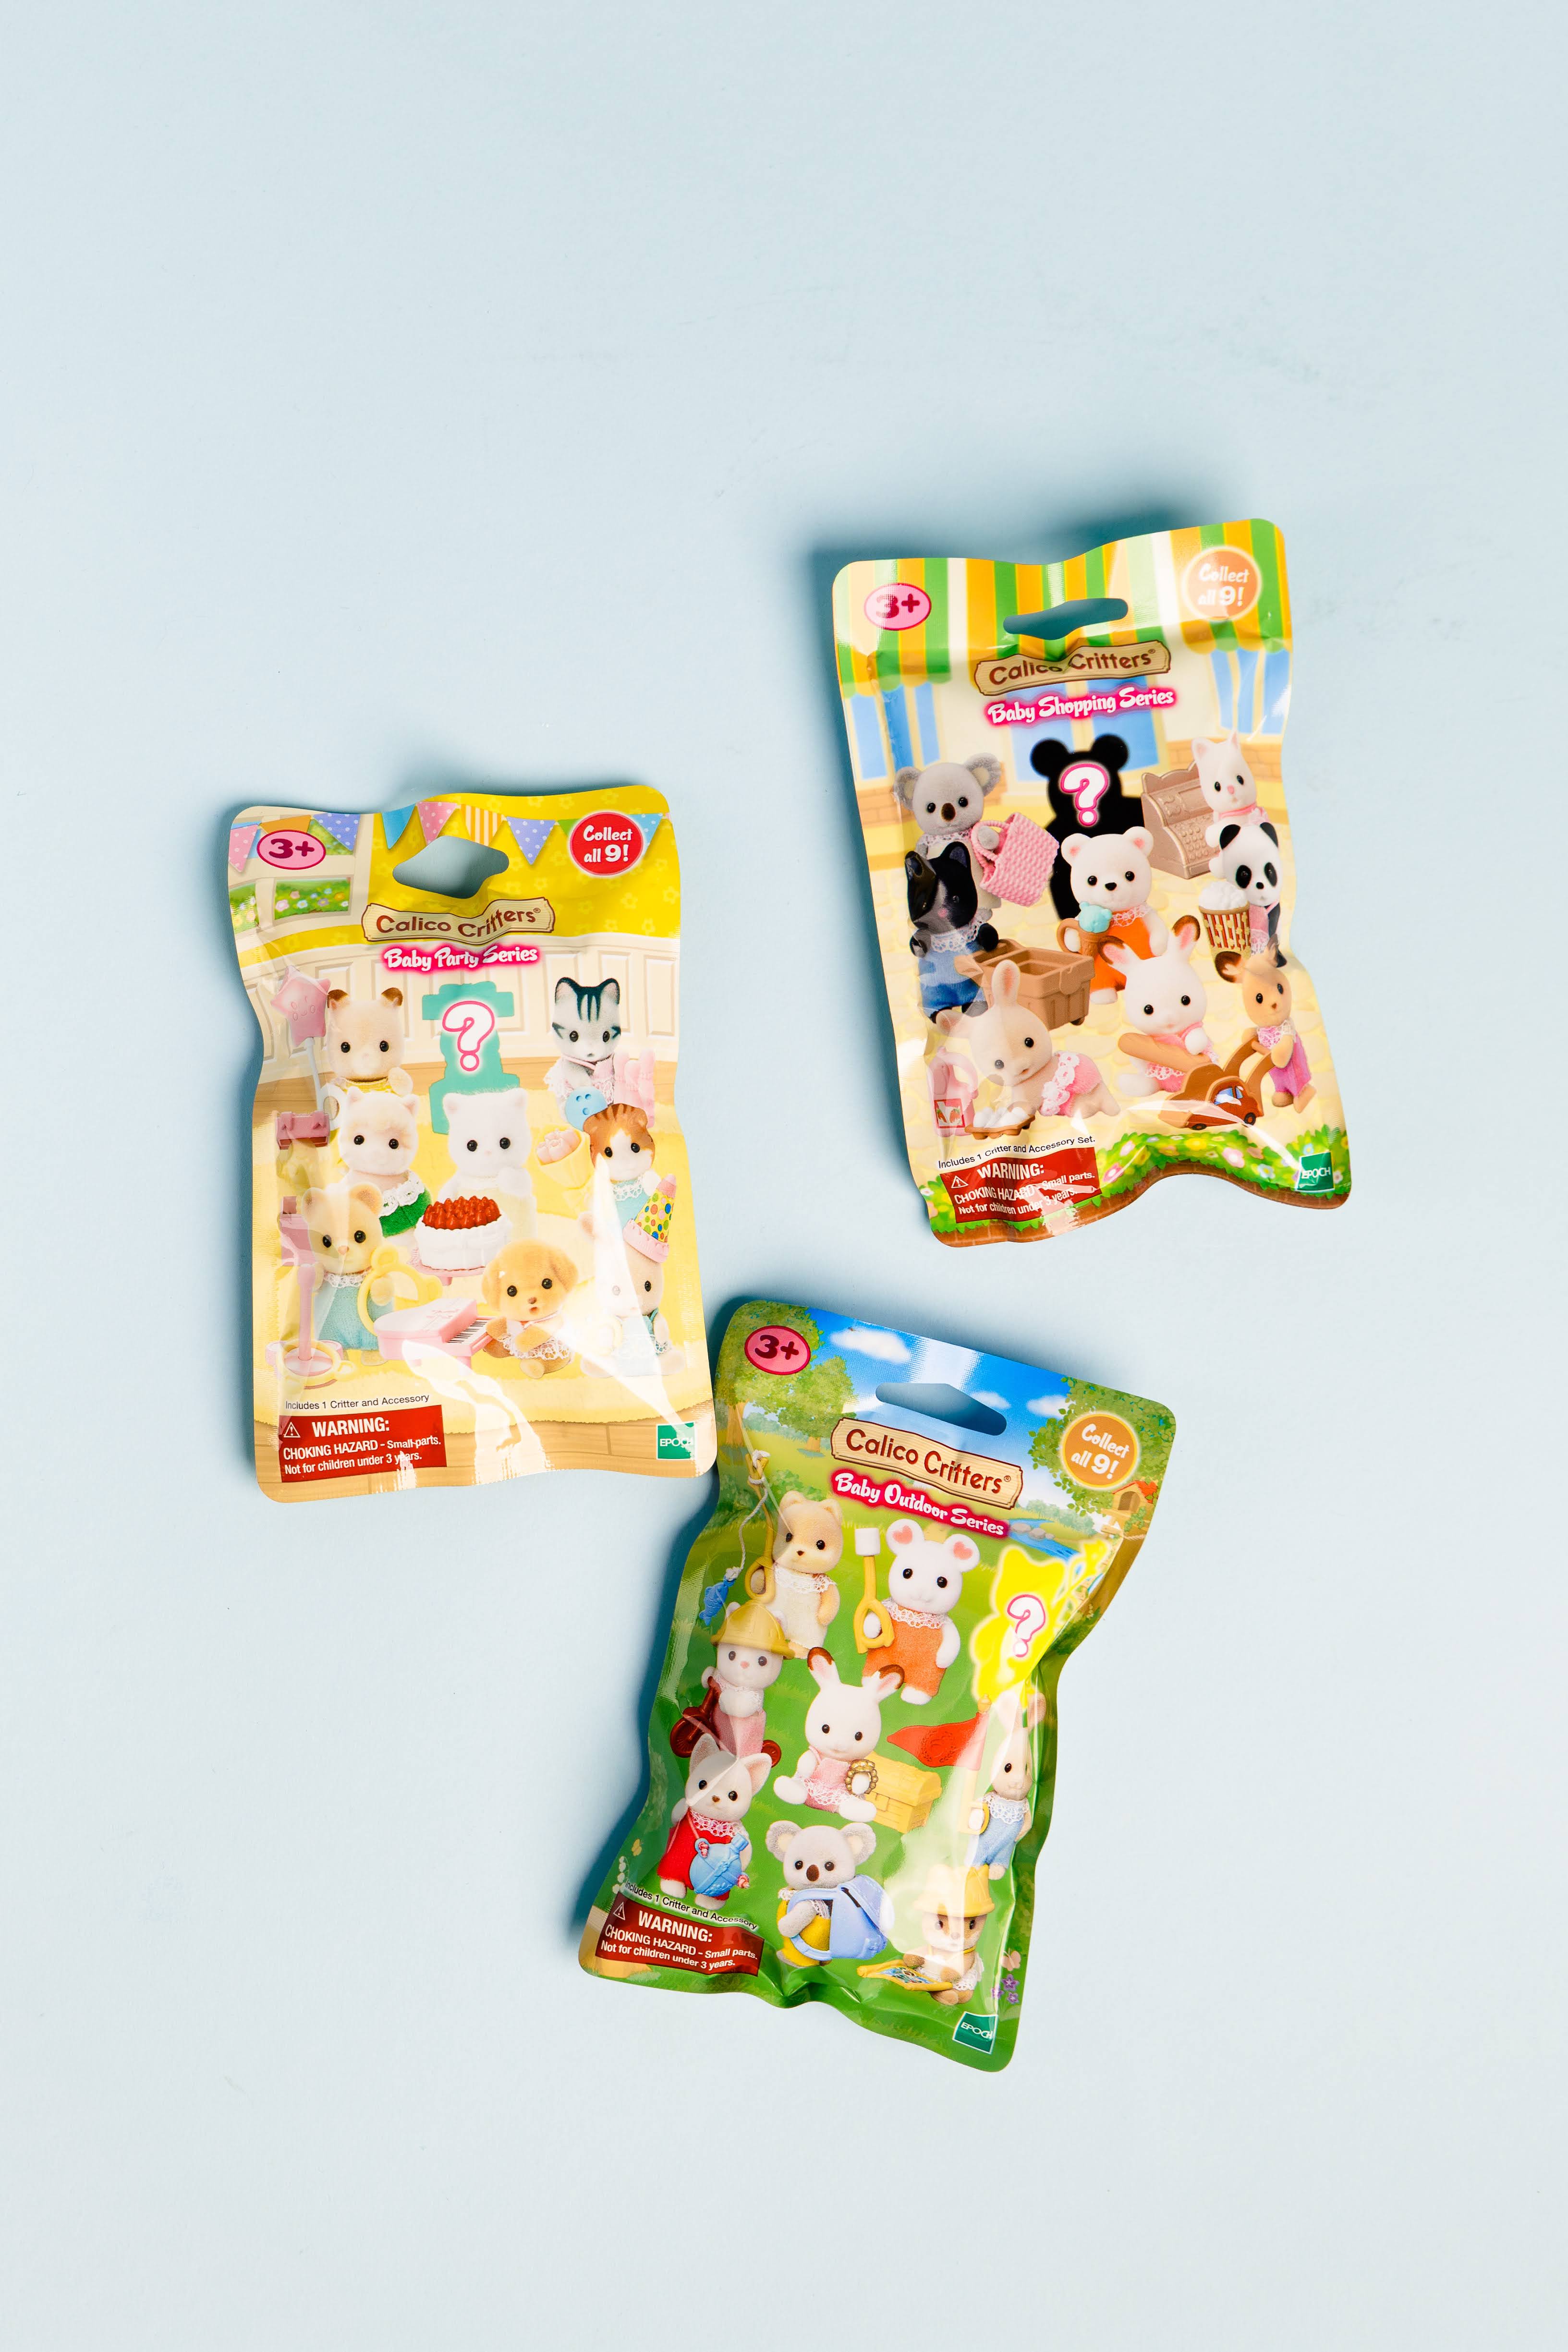 Calico Critters Collectibles Baby Blind Bag